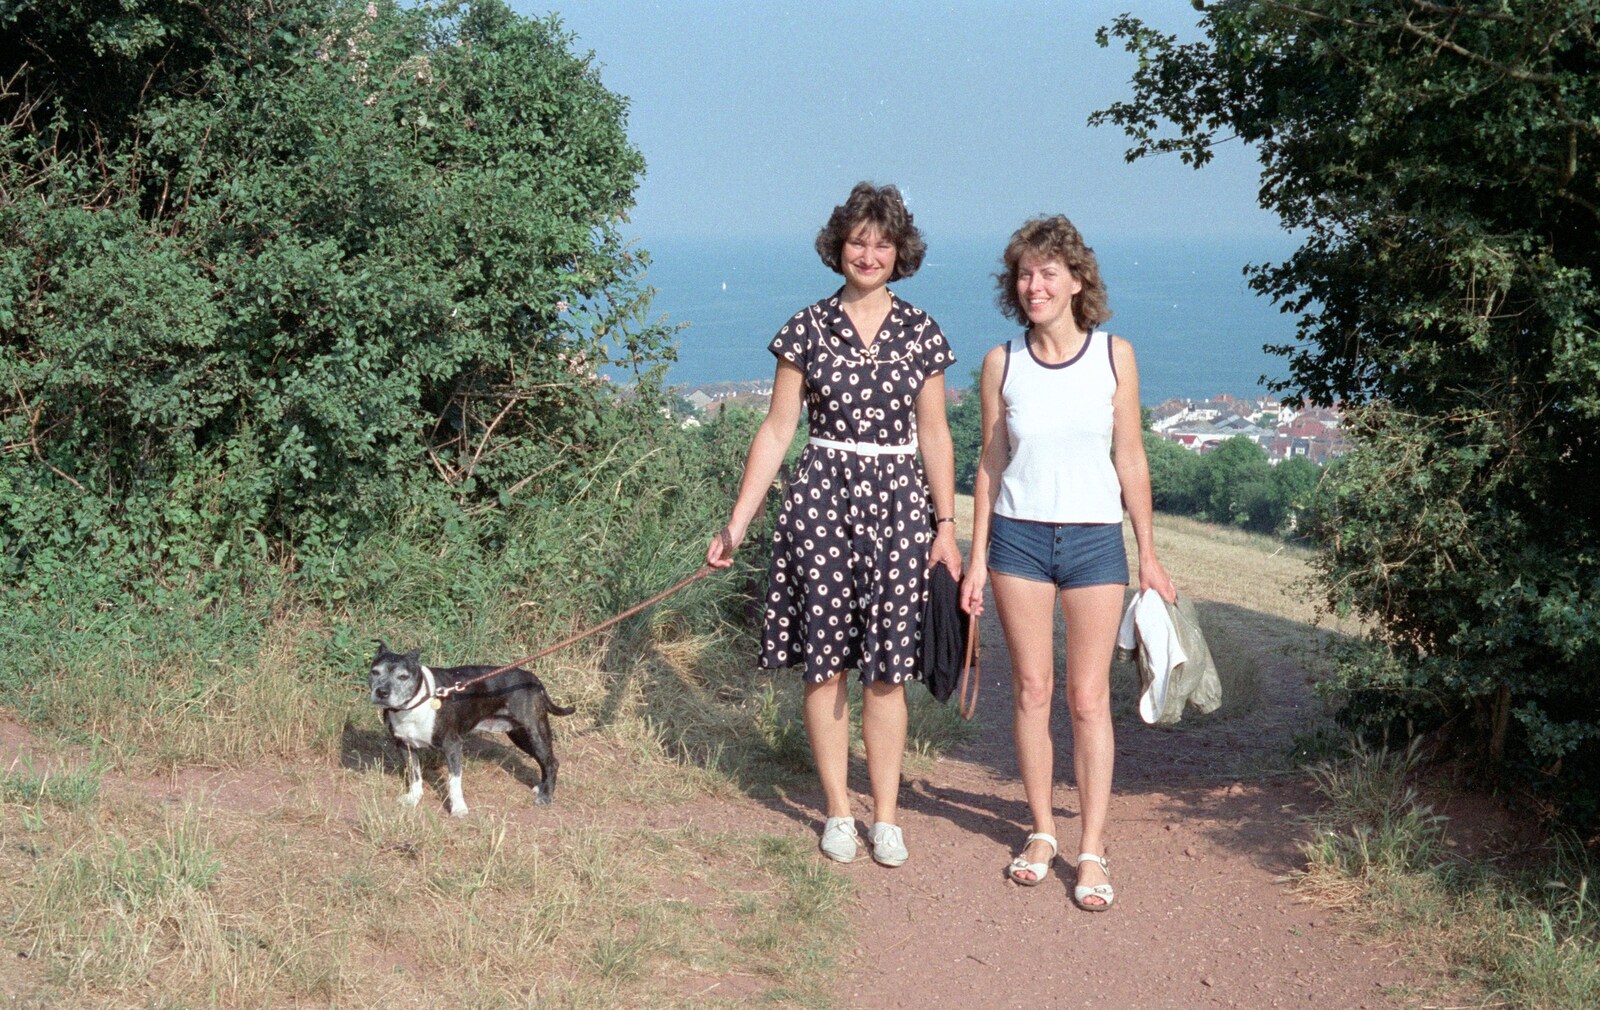 Angela and Jane pause for a photo from Uni: A Trip to the Riviera and Oberon Gets New Shoes, Torquay and Harbertonford, Devon - 3rd July 1989